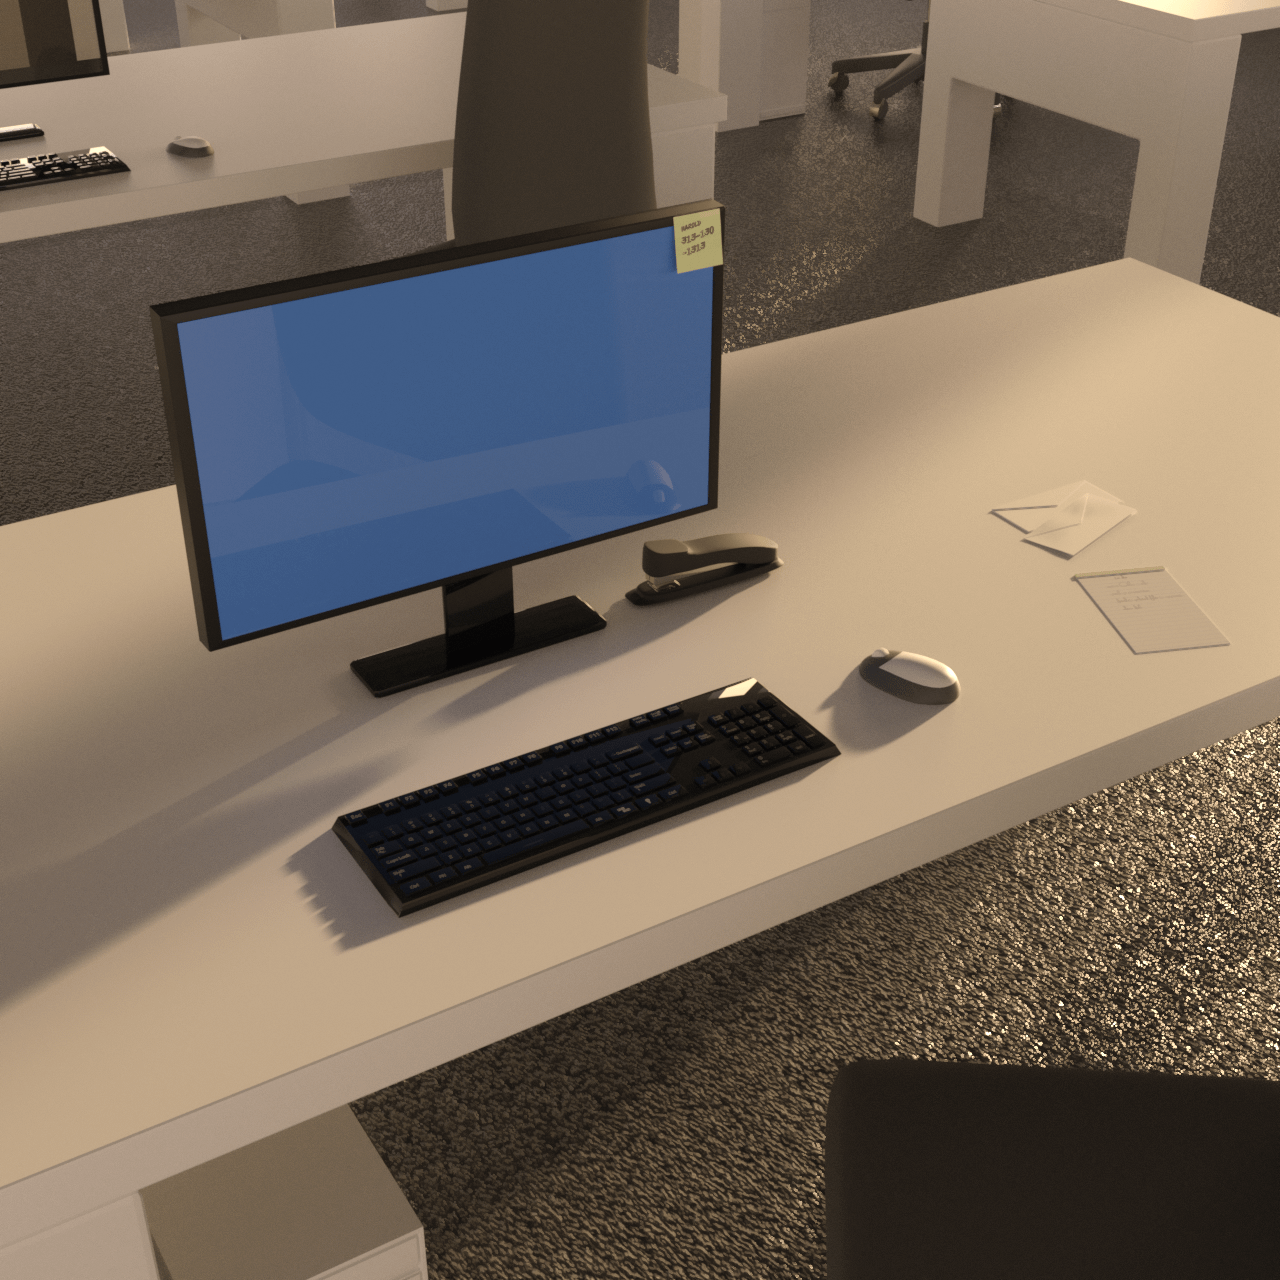 computer monitor 3d model including keyboard and mouse on a desk